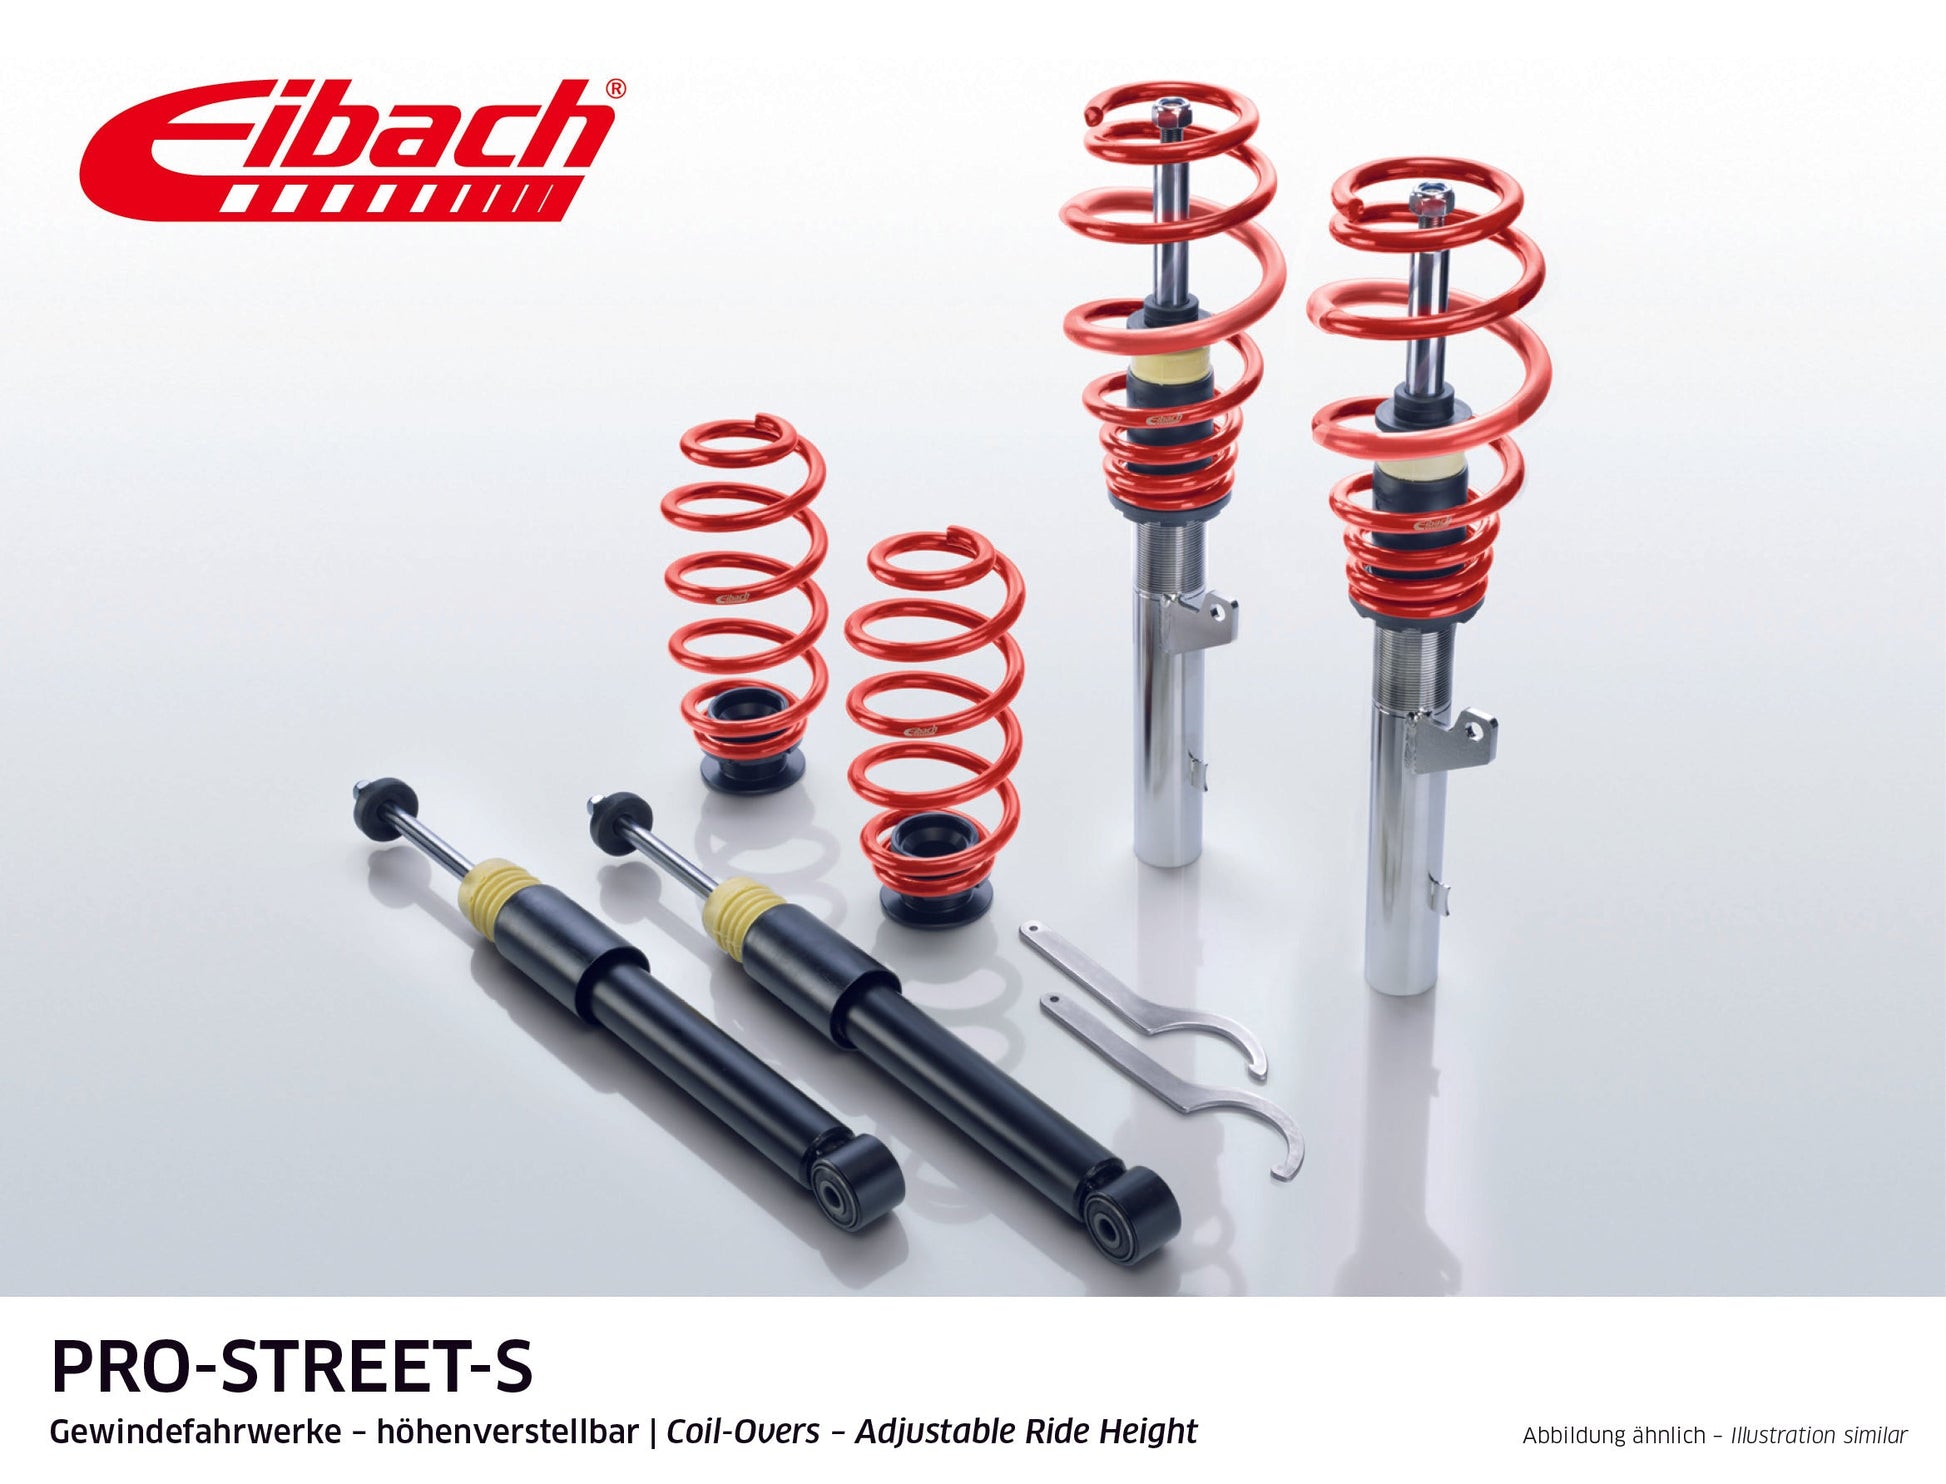 Eibach Pro-Street Coilover (PSS65-15-023-02-22) at £1539.99